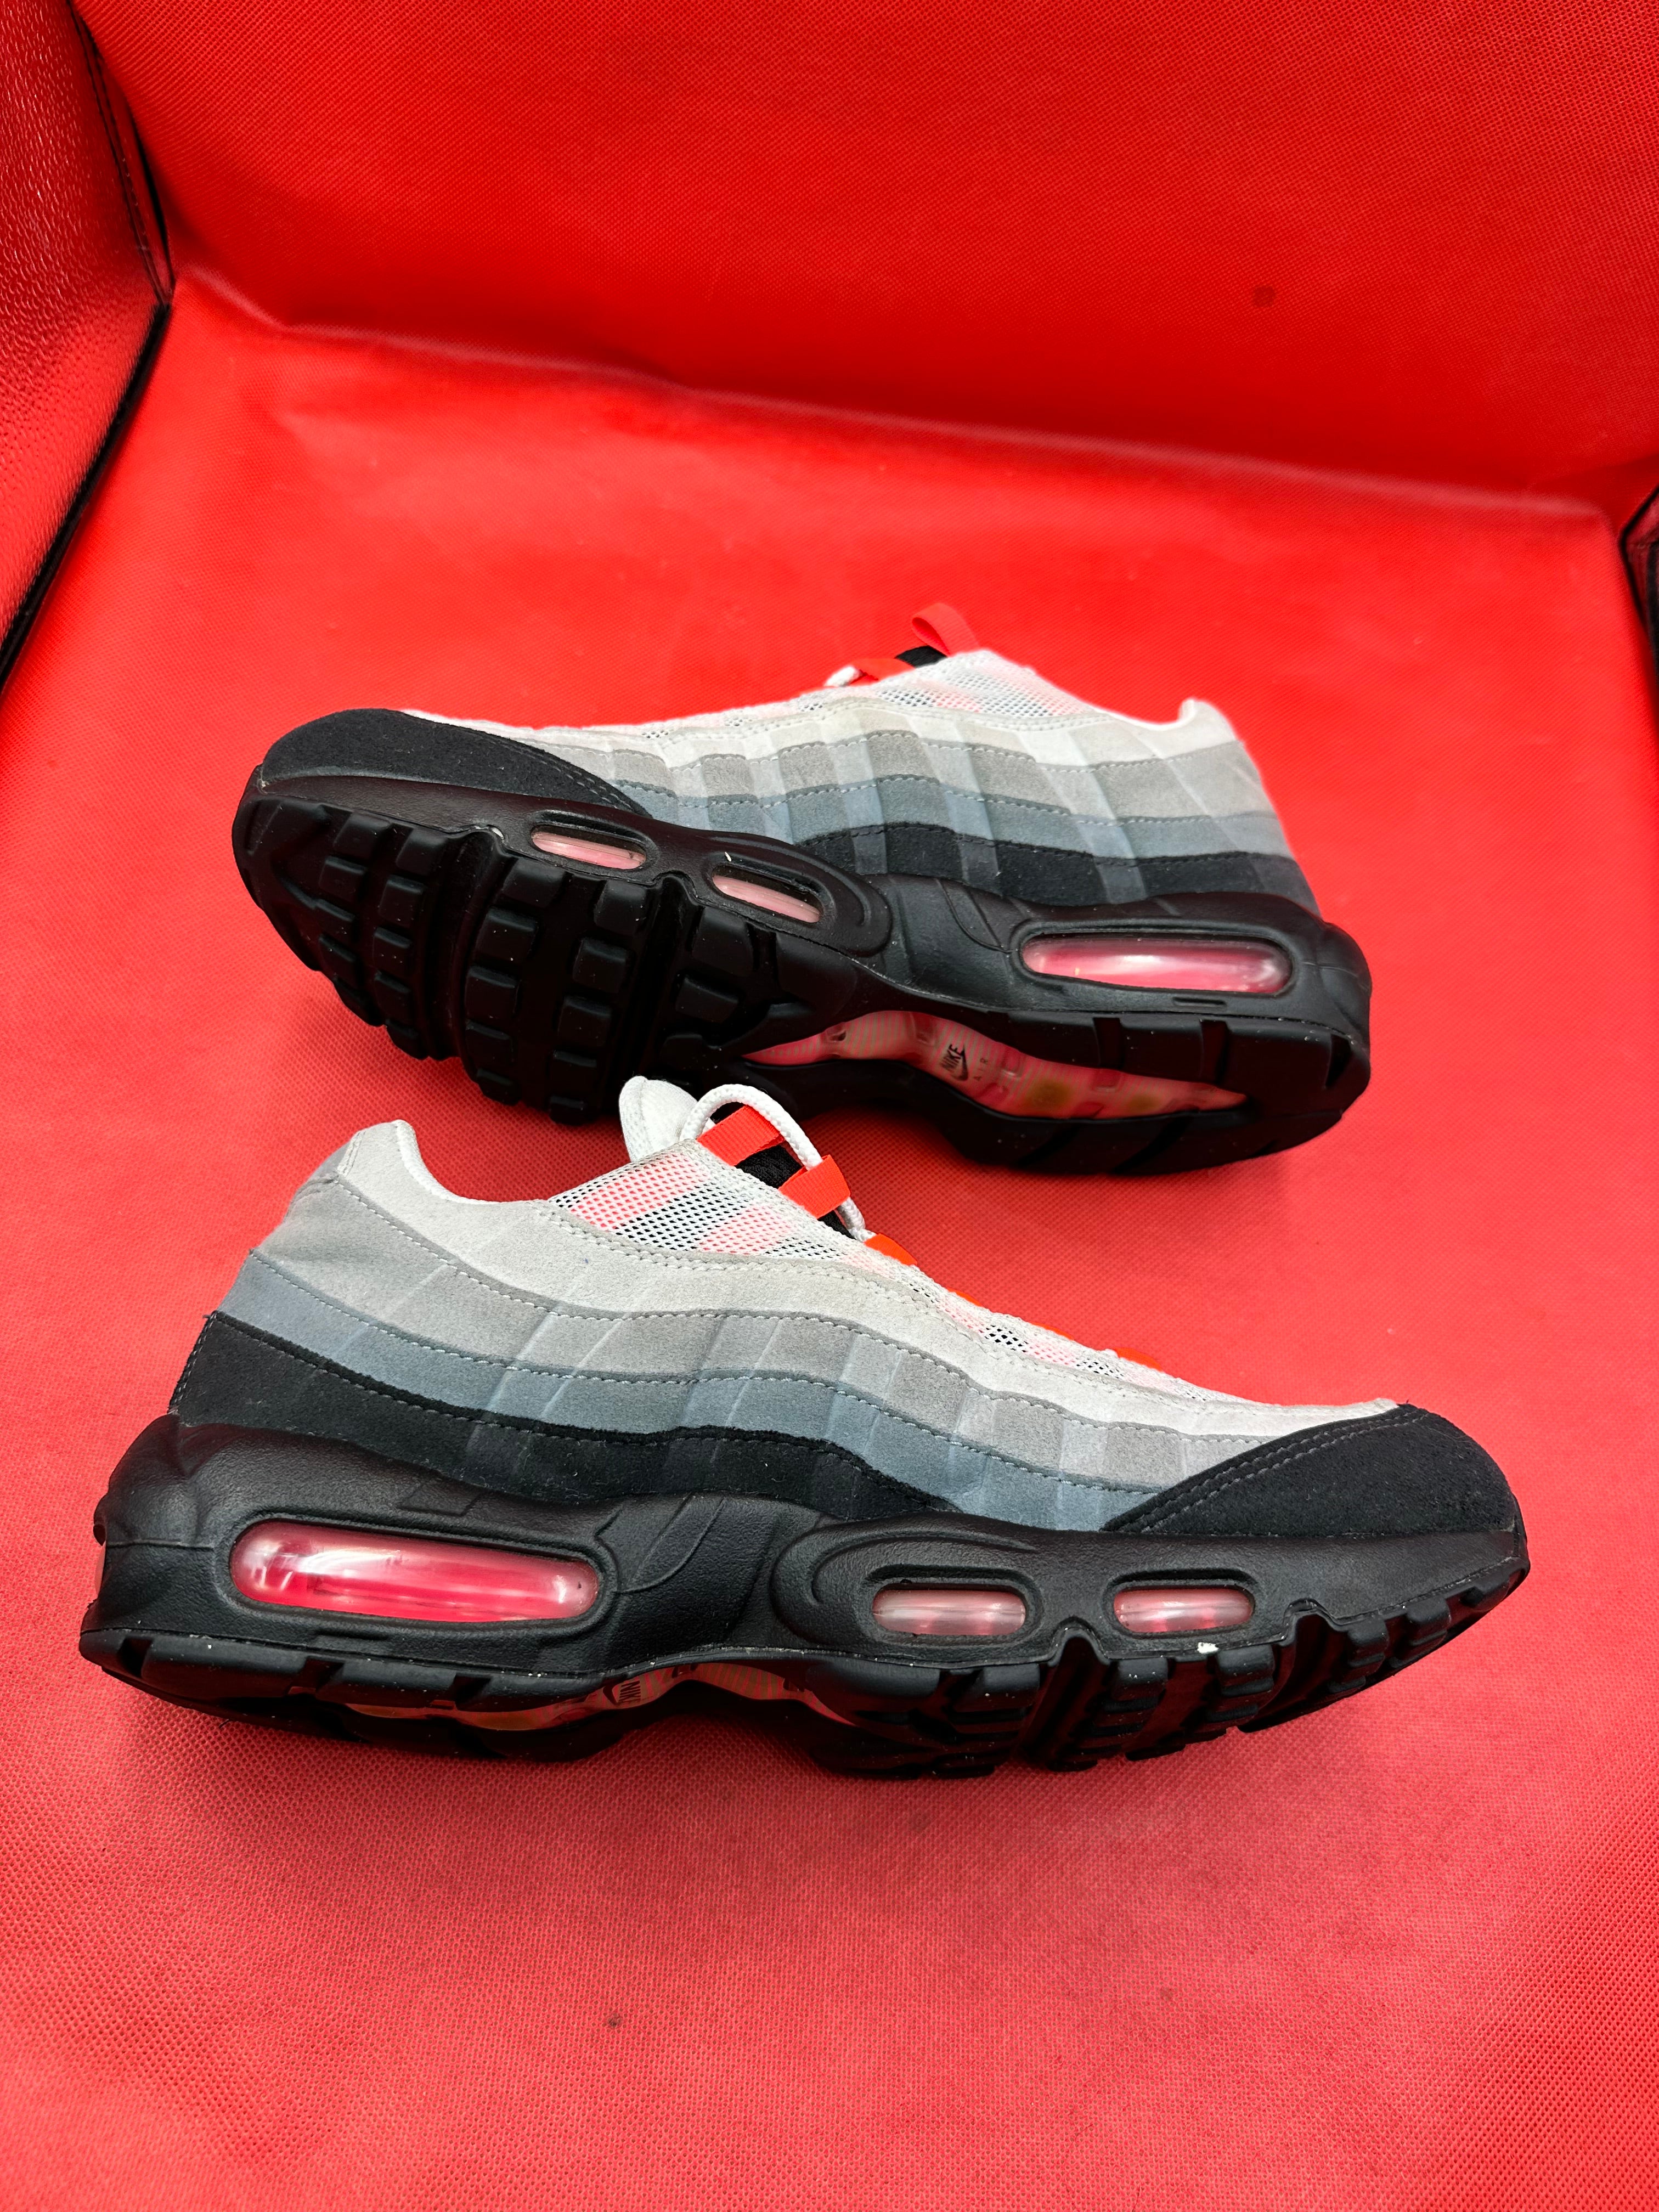 Solar Red Nike Air max 95 size 10